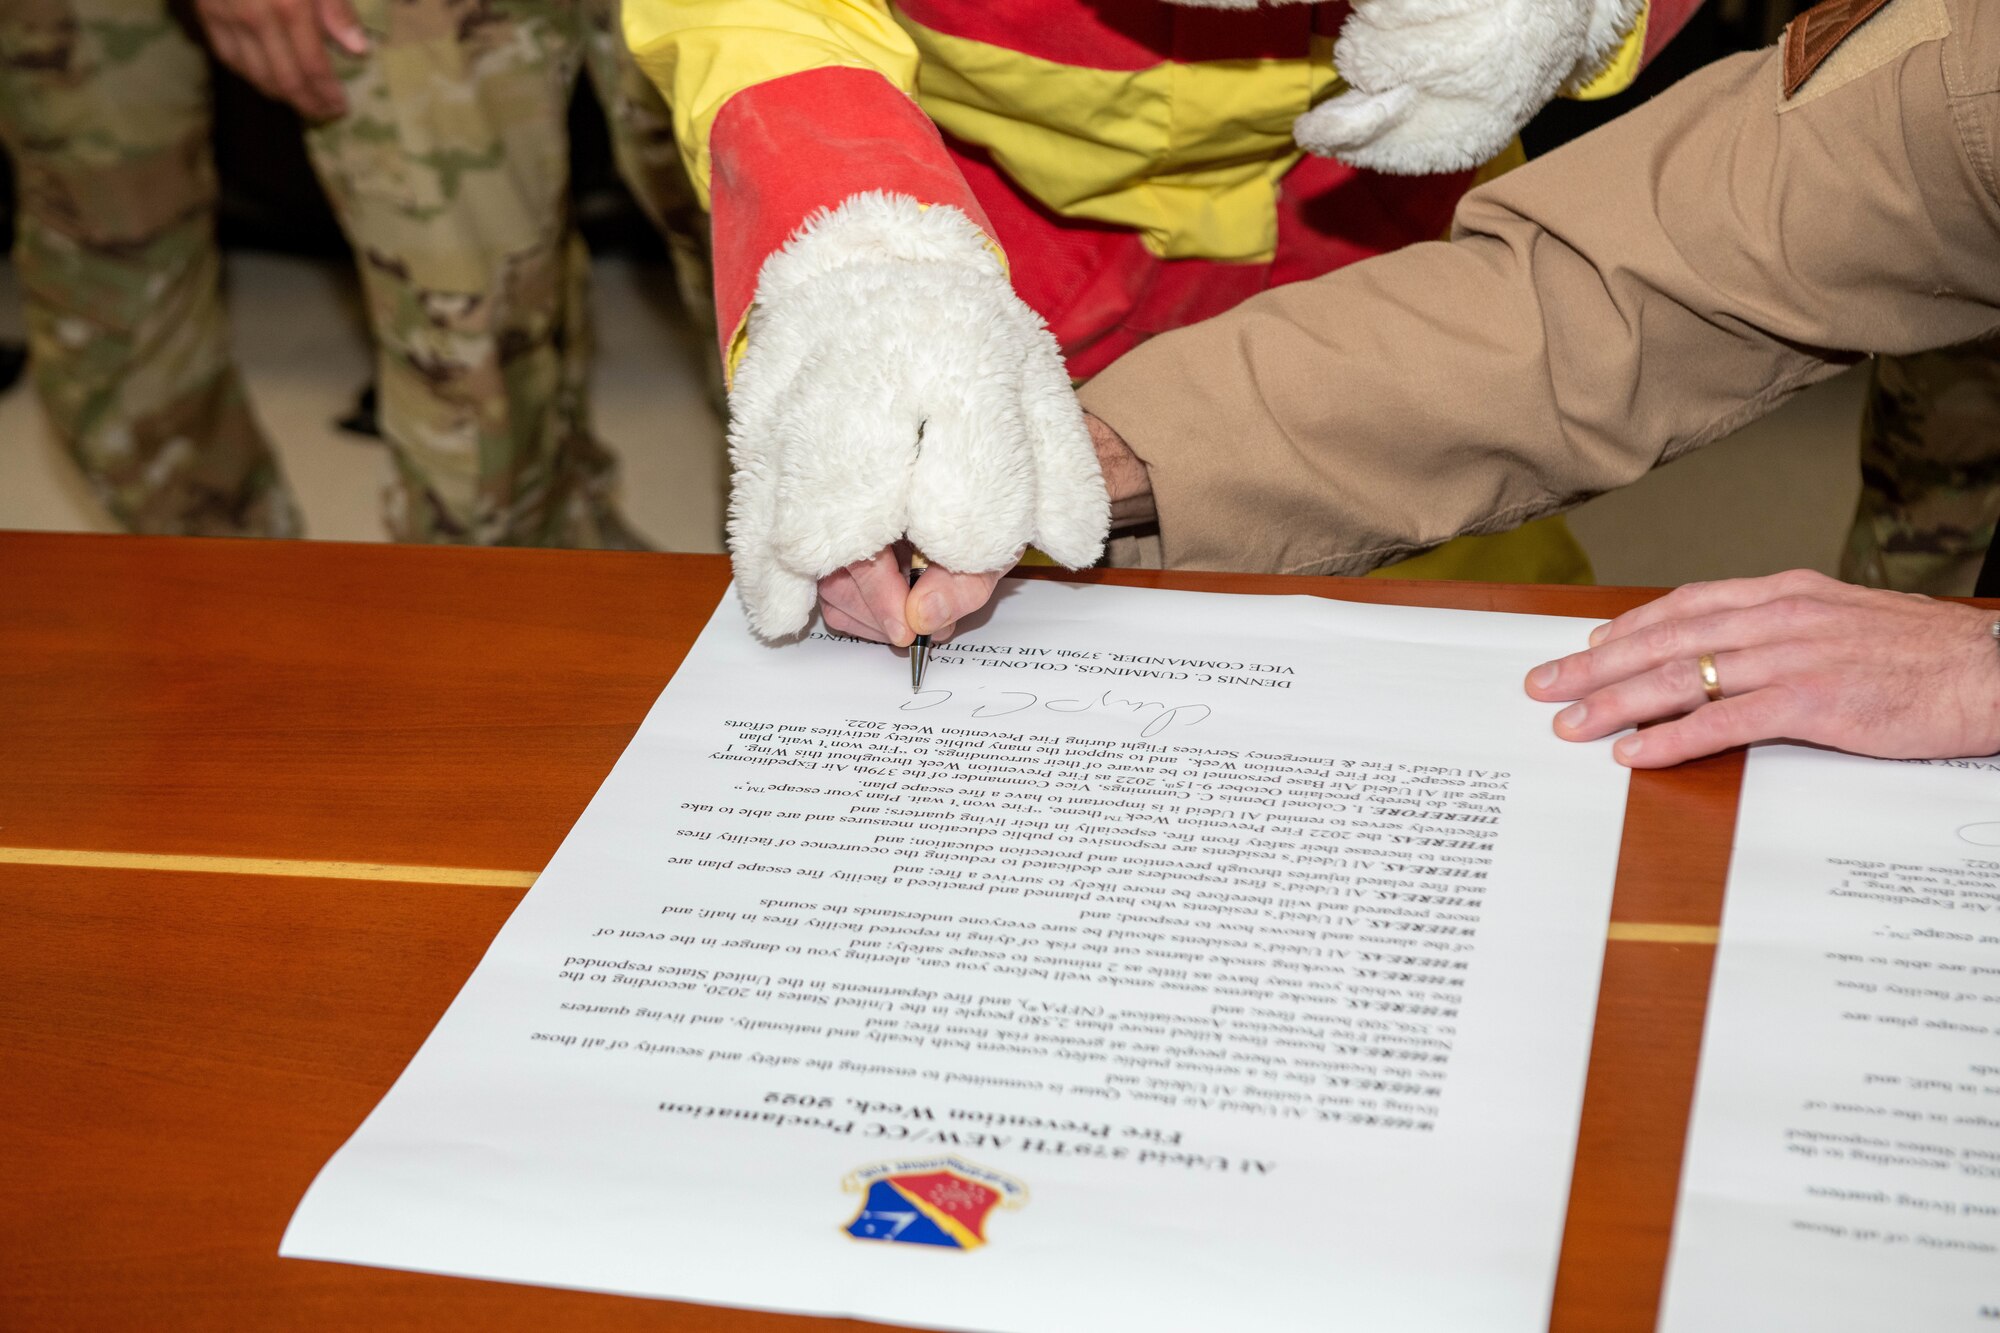 U.S. Air Force Col. Dennis Cummings, 379th Air Expeditionary Wing deputy commander, signs a fire proclamation on Al Udeid Air Base, Qatar, Sept. 30, 2022. During Fire Prevention Week, firefighters with the 379th Expeditionary Civil Engineer Squadron will hold activities focused on fire prevention and awareness. (U.S. Air National Guard photo by Airman 1st Class Constantine Bambakidis)